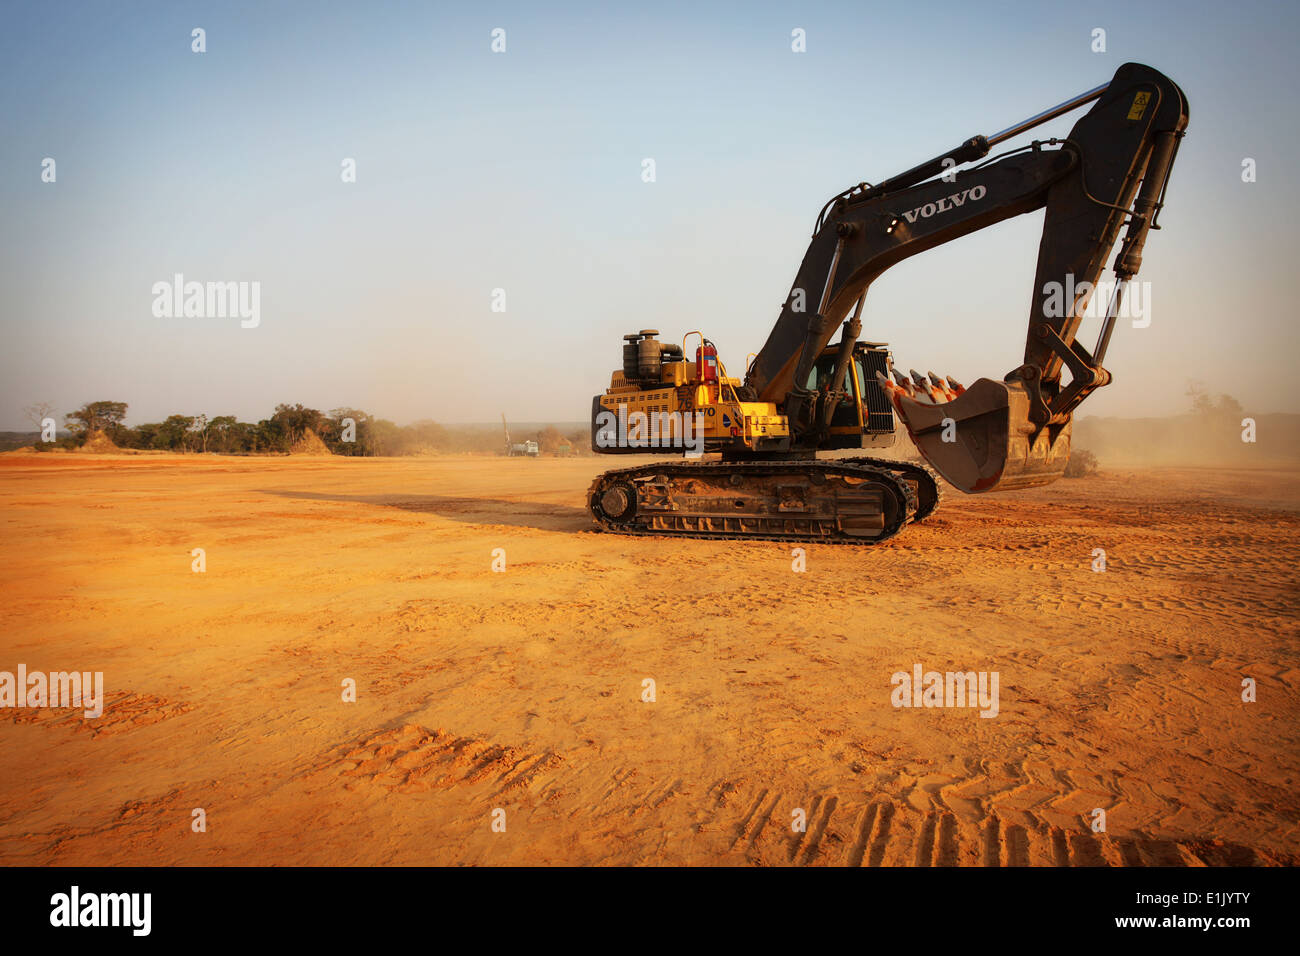 Digger excavator at sunset on a copper mine in Zambia Stock Photo